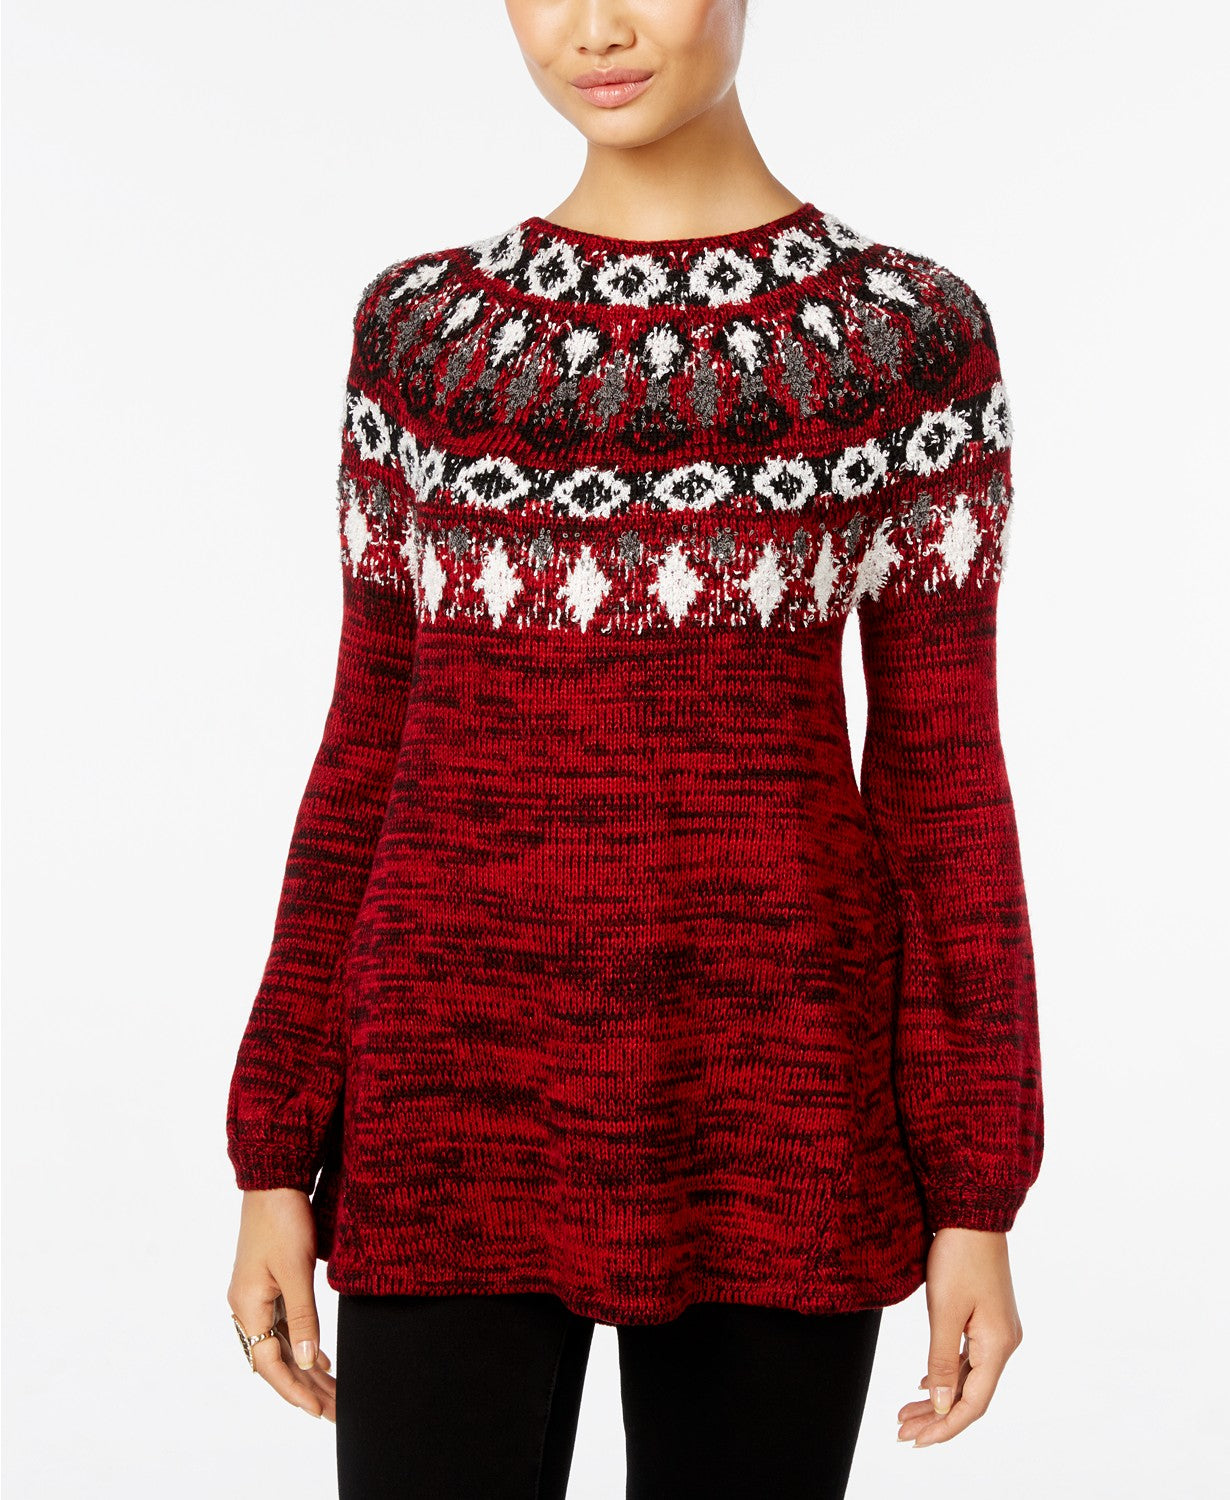 Style Co Petite Fair Isle Marled Sweate New Red Amore Combo PL